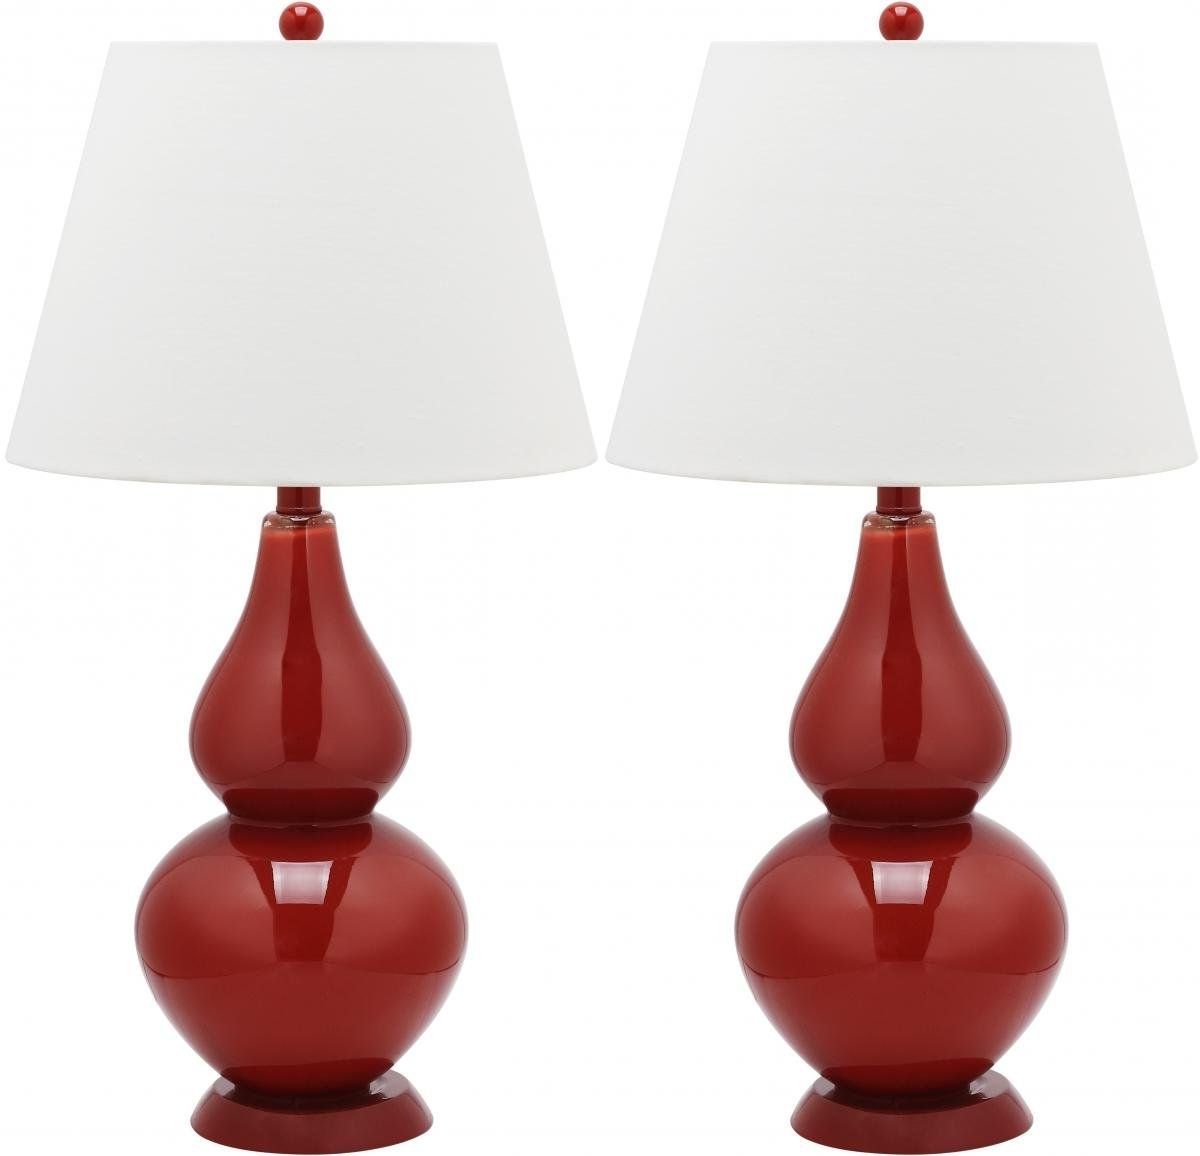 Current Vintage Red Table Lamp For Living Room Traditional Table Lamp With Intended For Red Living Room Table Lamps (View 14 of 20)